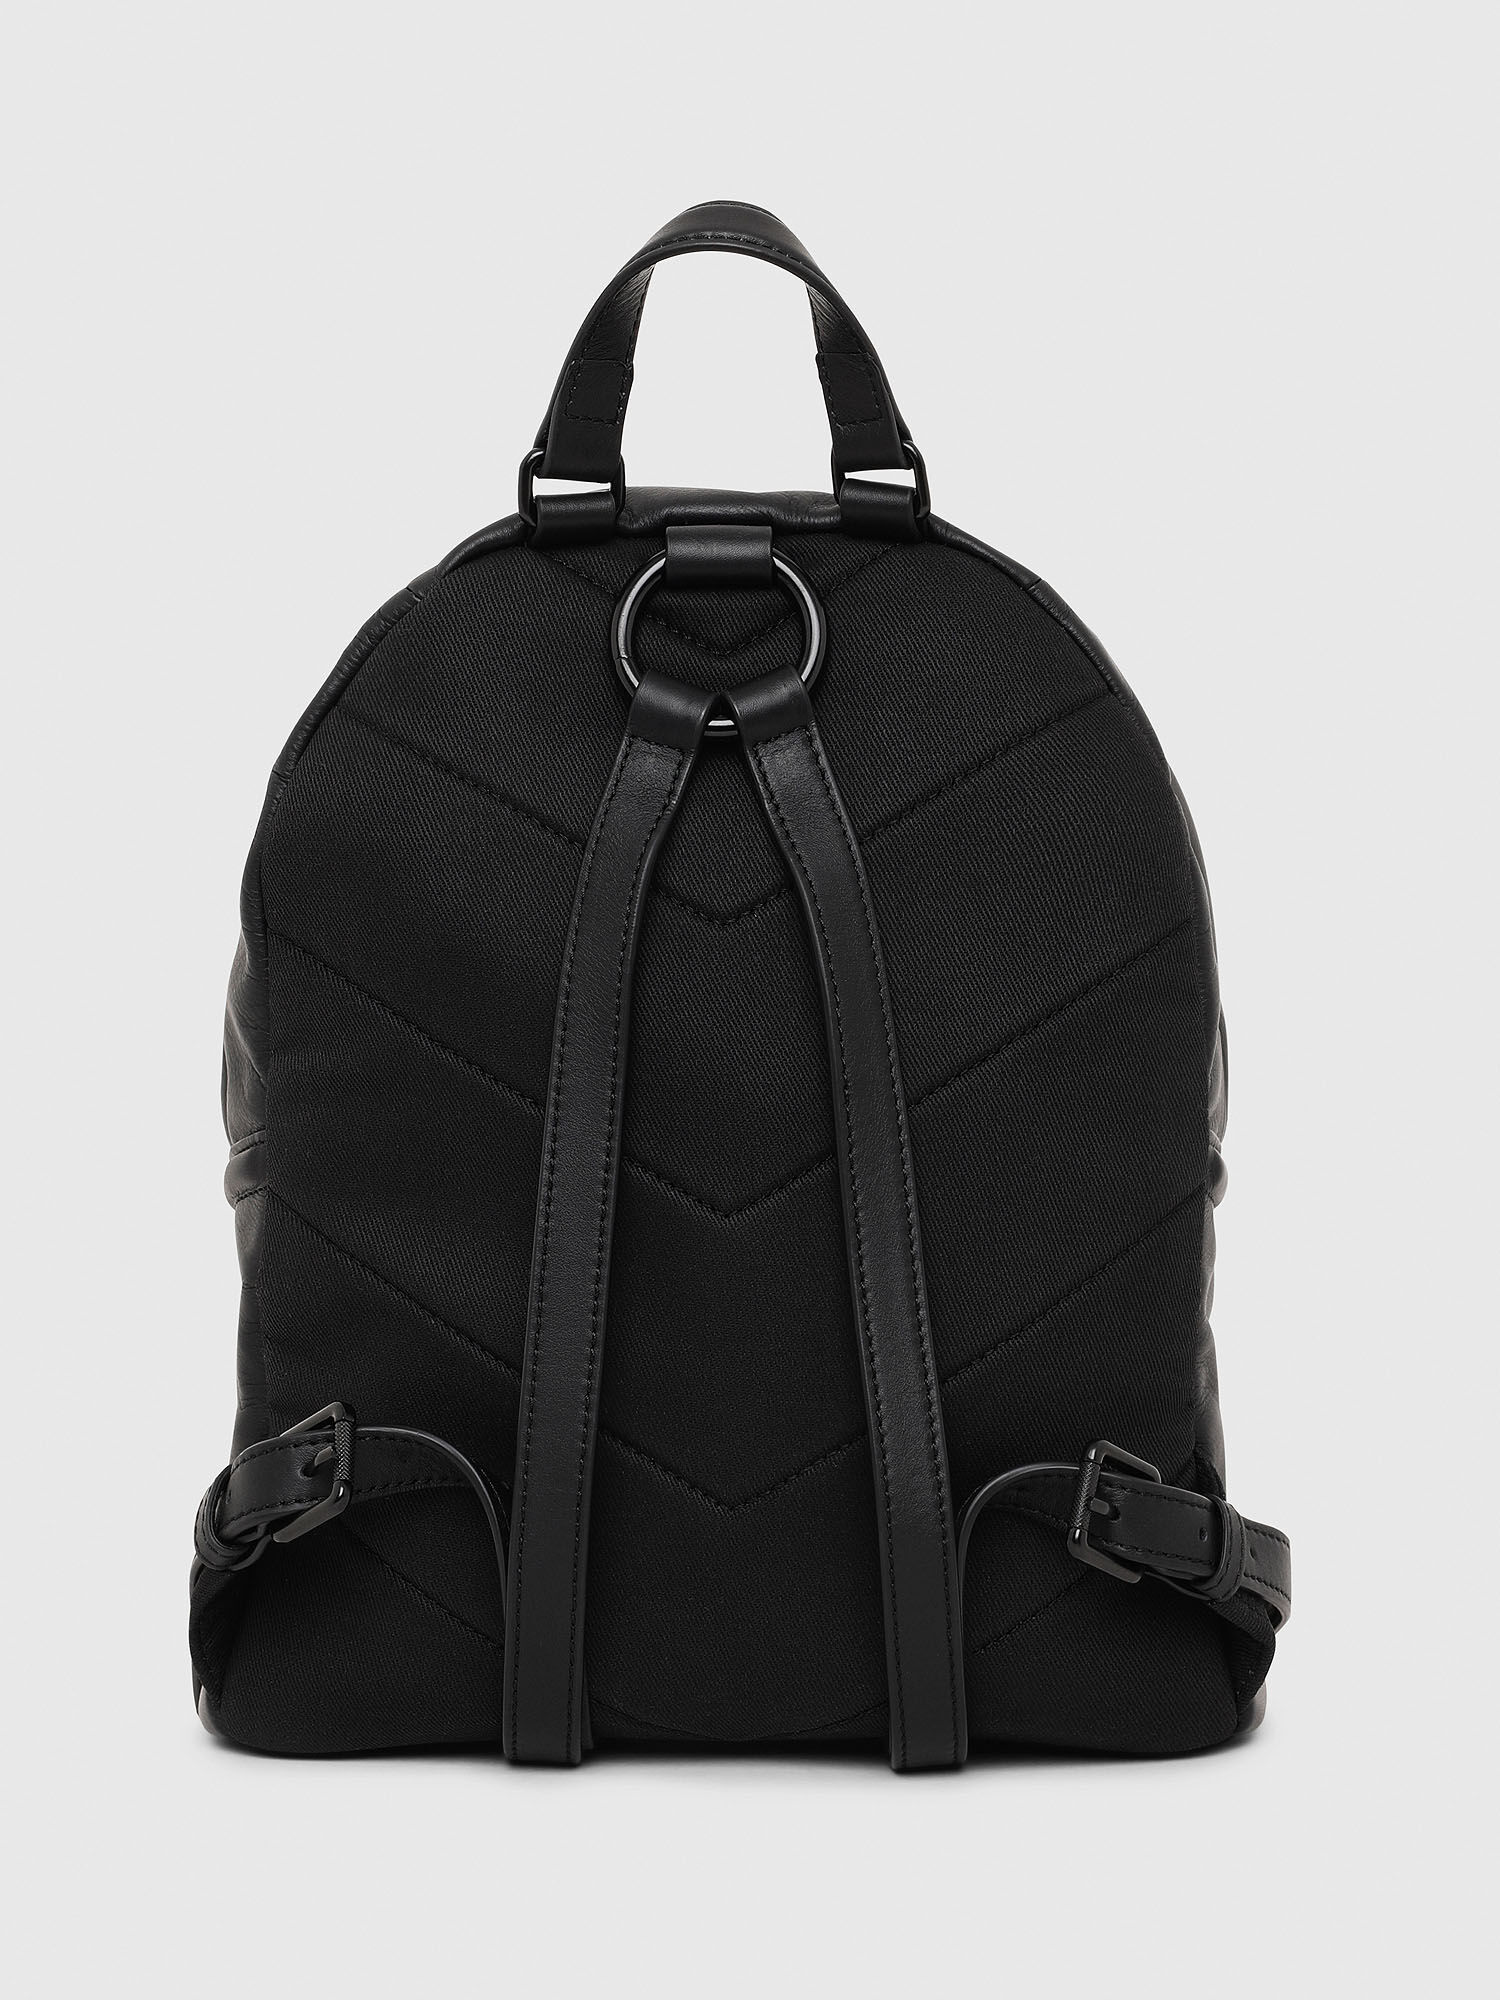 LE-ZIPPER BACKPACK Women: Leather backpack with patches | Diesel